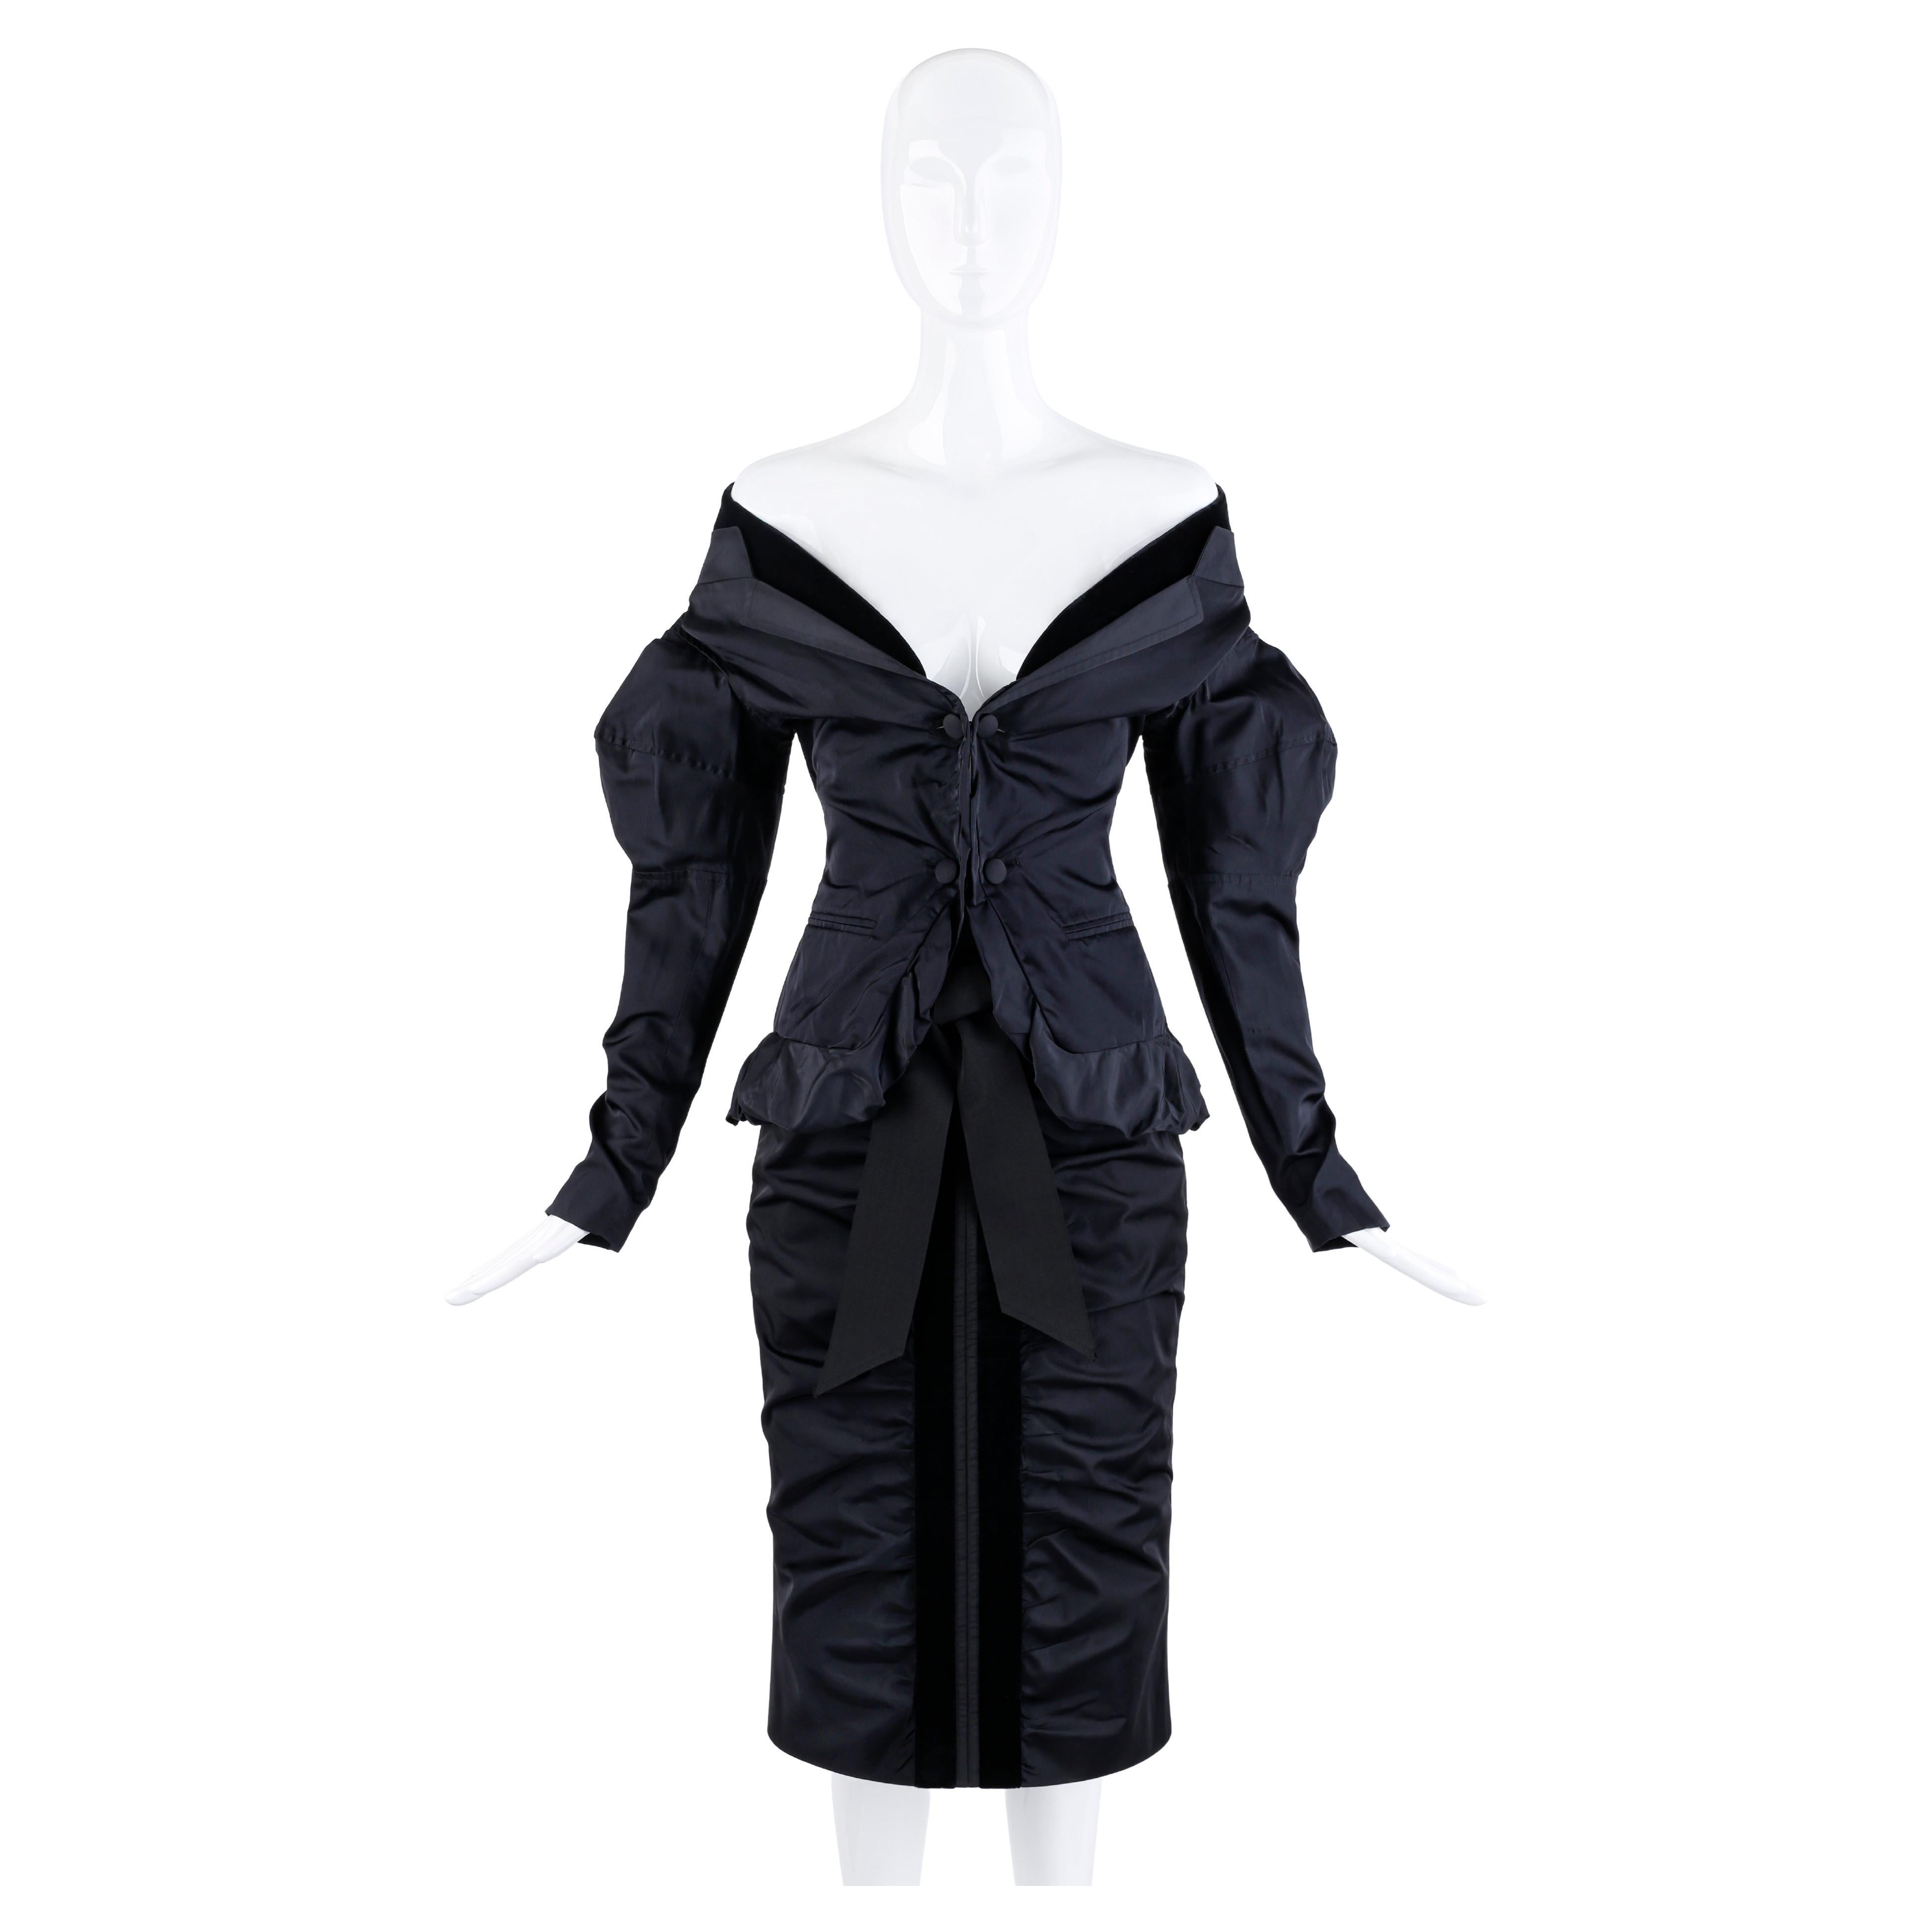 Yves Saint Laurent by Tom Ford F/W 2002 Black Silk Evening Jacket & Skirt Suit For Sale